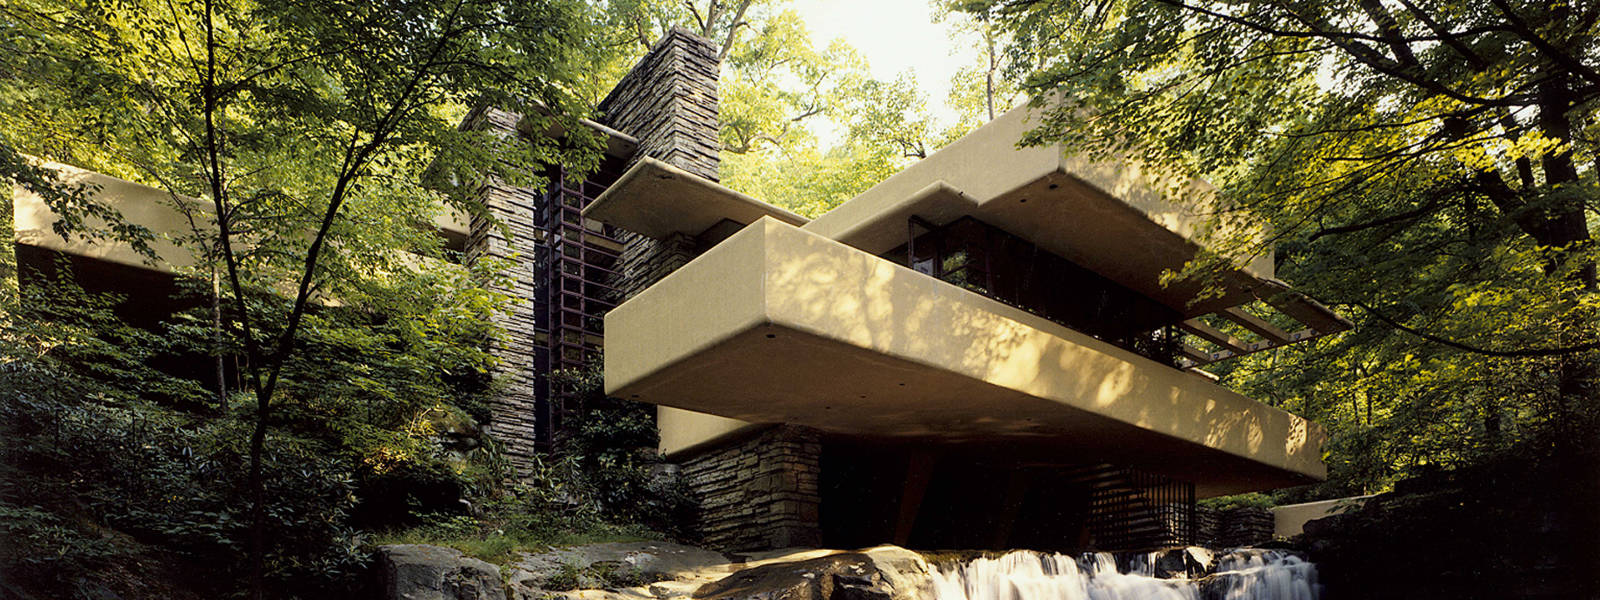 Fallingwater Installation: Large Vase from Modern Made Leisure by Charles Lutz – Ruba Rombic Kauffman’s Advertisement